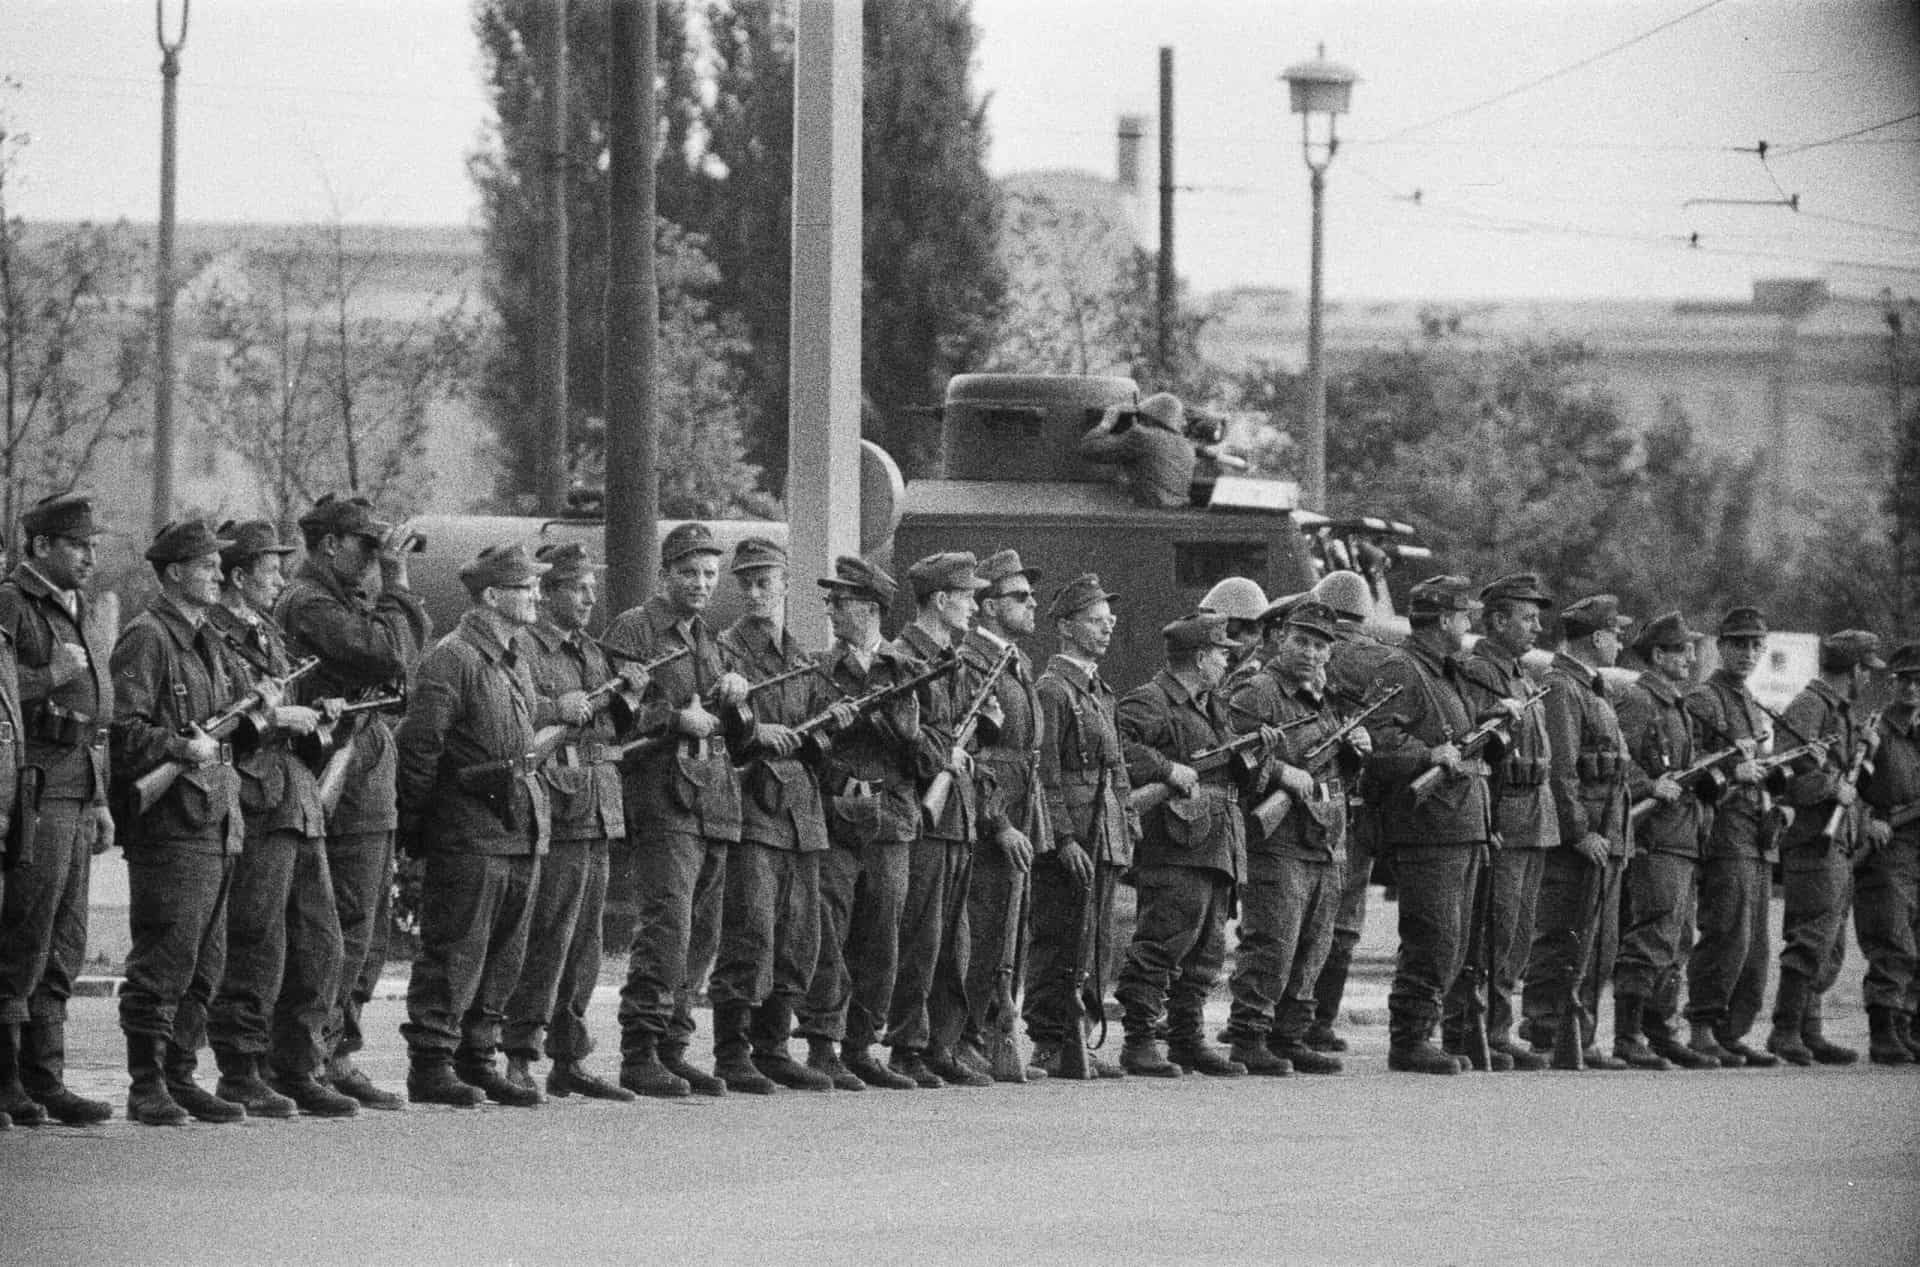 <p>At midnight on Sunday, August 13, the police and units of the East German security forces began to close the border. By the morning, the border with West Berlin was closed. Construction of the Berlin Wall began the same day.</p><p><a href="https://www.msn.com/en-us/community/channel/vid-7xx8mnucu55yw63we9va2gwr7uihbxwc68fxqp25x6tg4ftibpra?cvid=94631541bc0f4f89bfd59158d696ad7e">Follow us and access great exclusive content everyday</a></p>